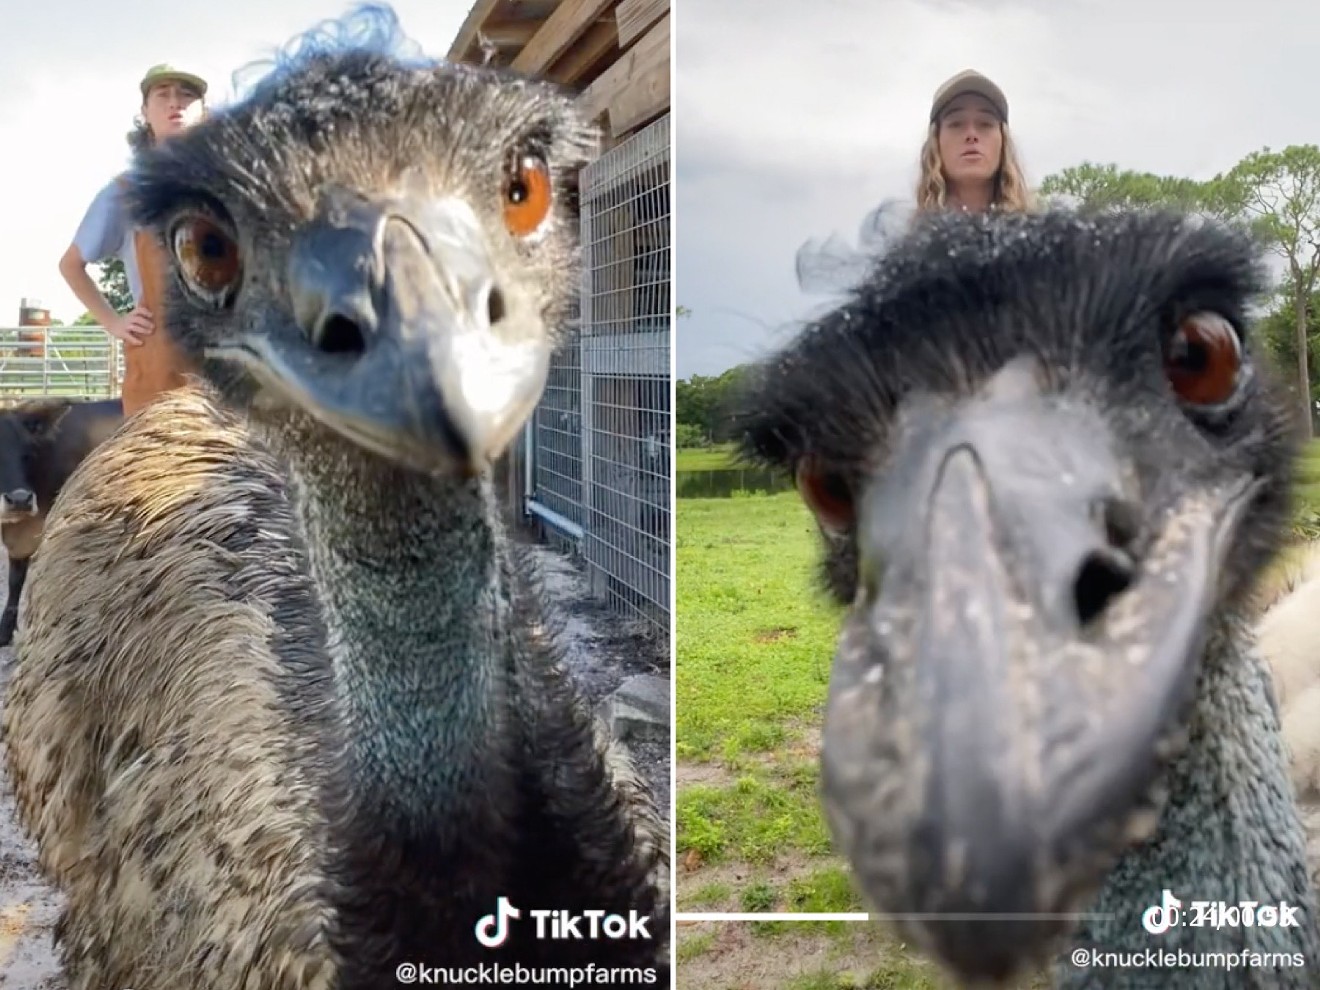 An emu named Emanuel has become the inadvertent star of the Knuckle Bump Farms' TikTok account.